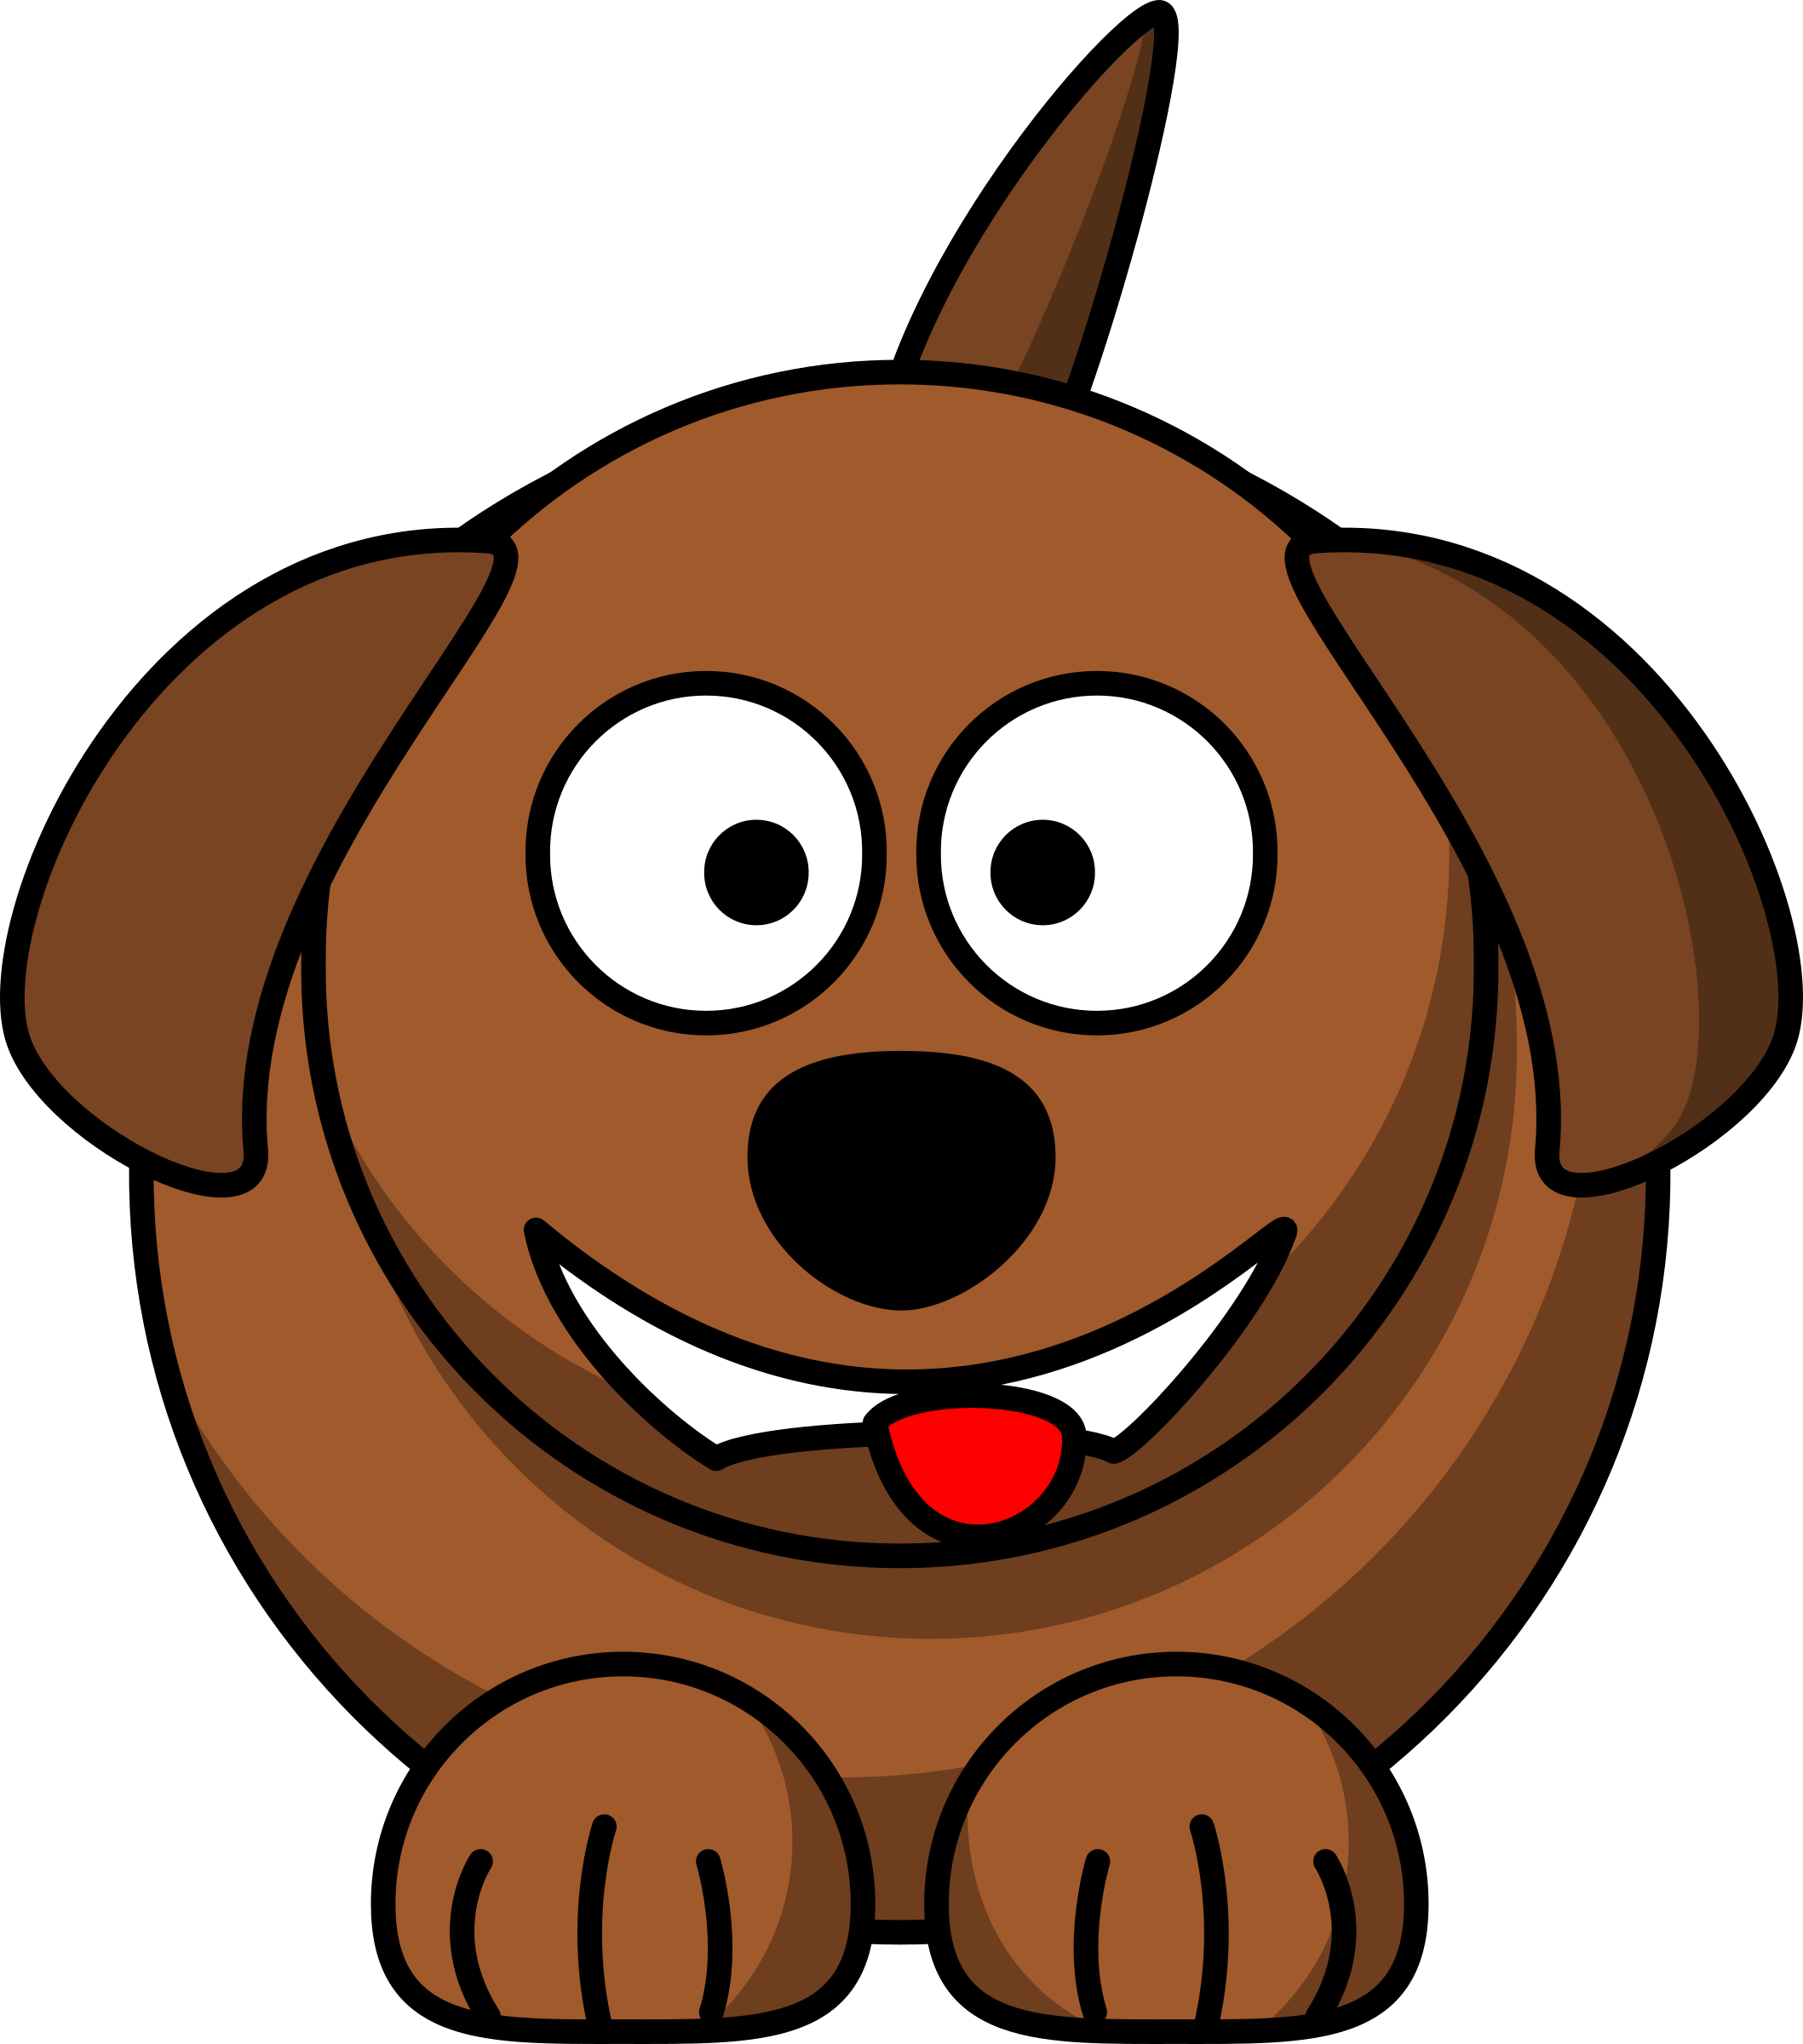 Cartoon Dog Laughing Or Smiling By Schplook